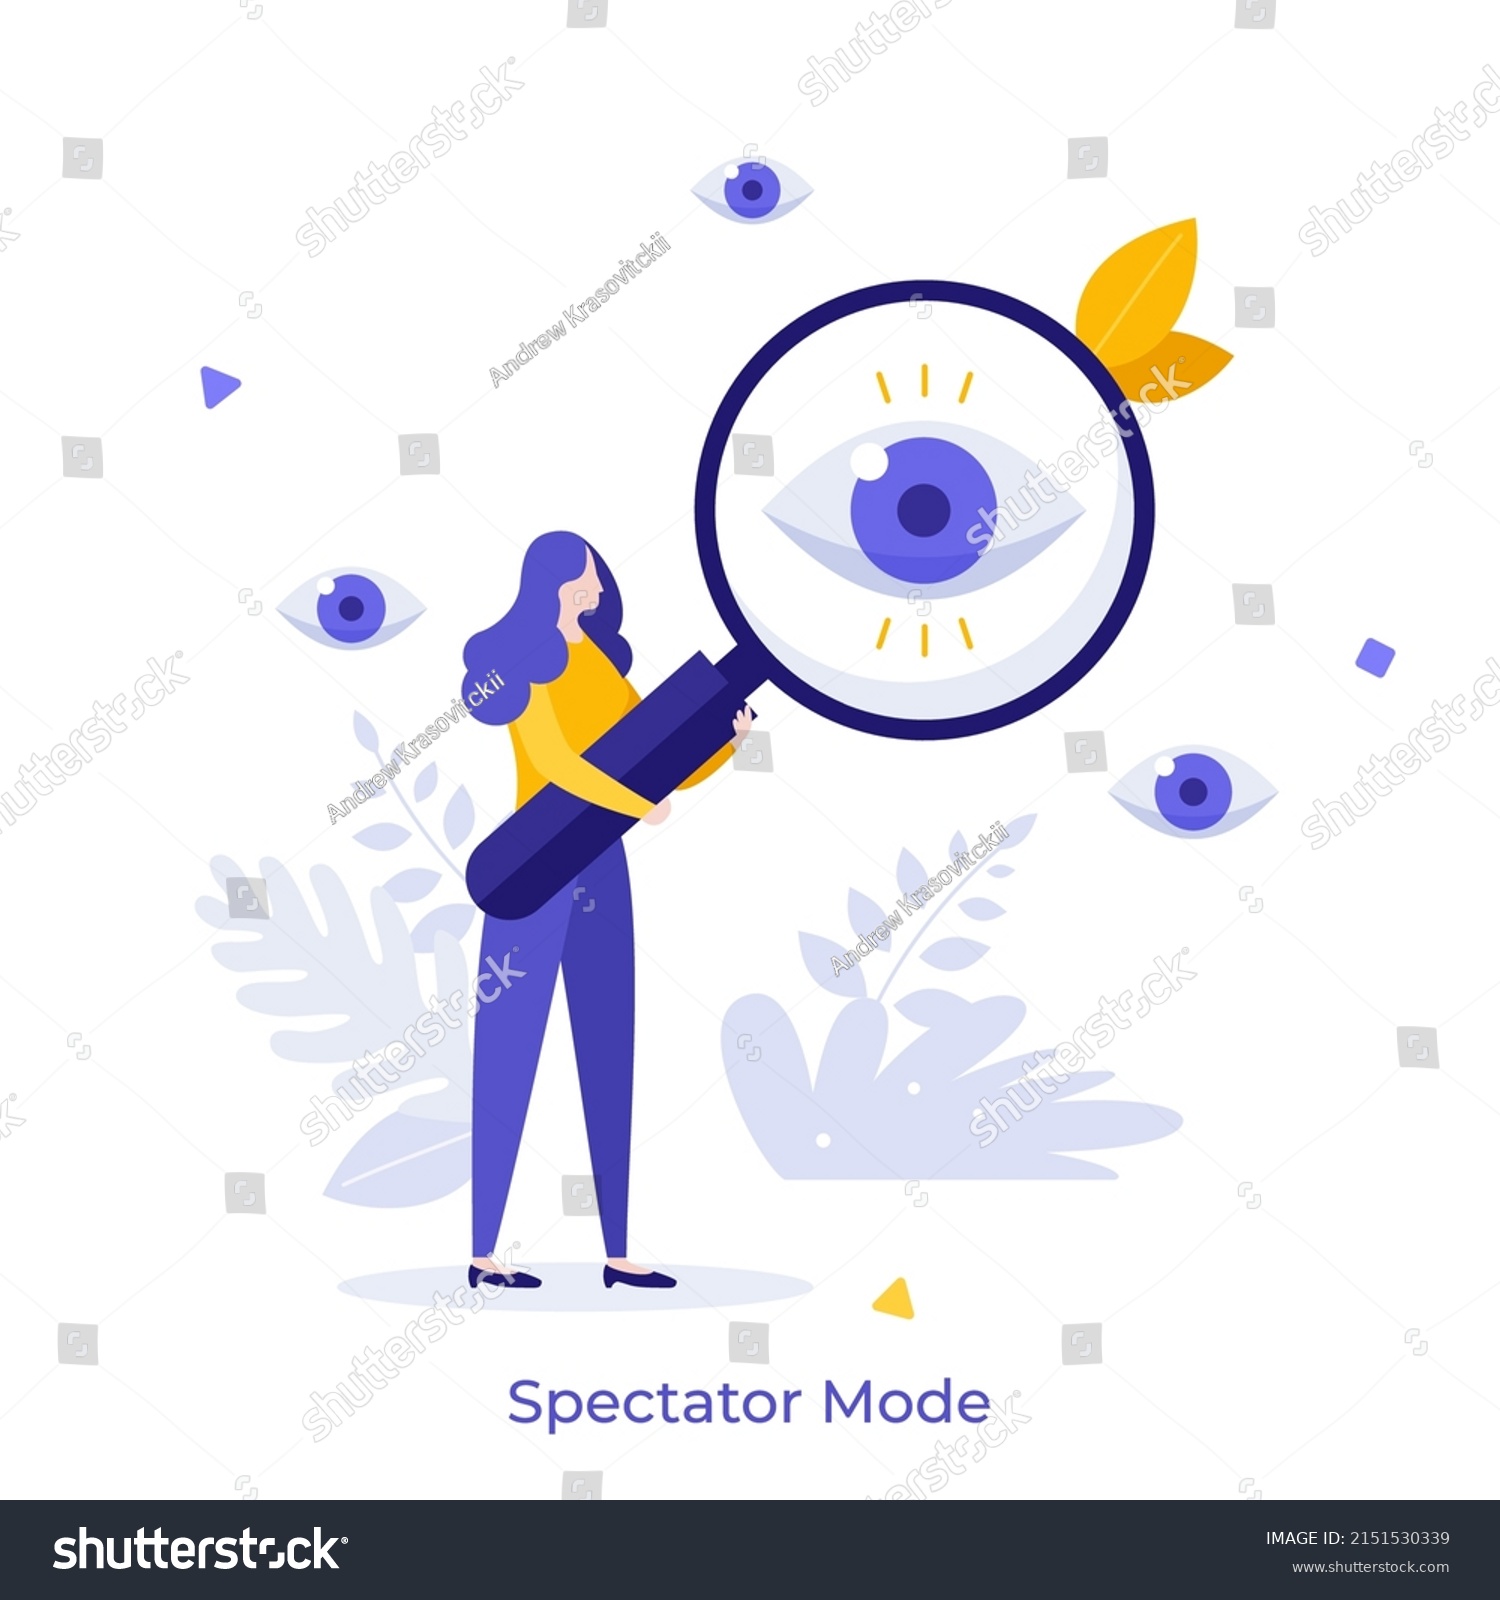 Woman looking at eye through magnifying glass. Concept of spectator or observer mode, privacy option, setting to disguise internet presence. Modern flat vector illustration for banner, poster. #2151530339